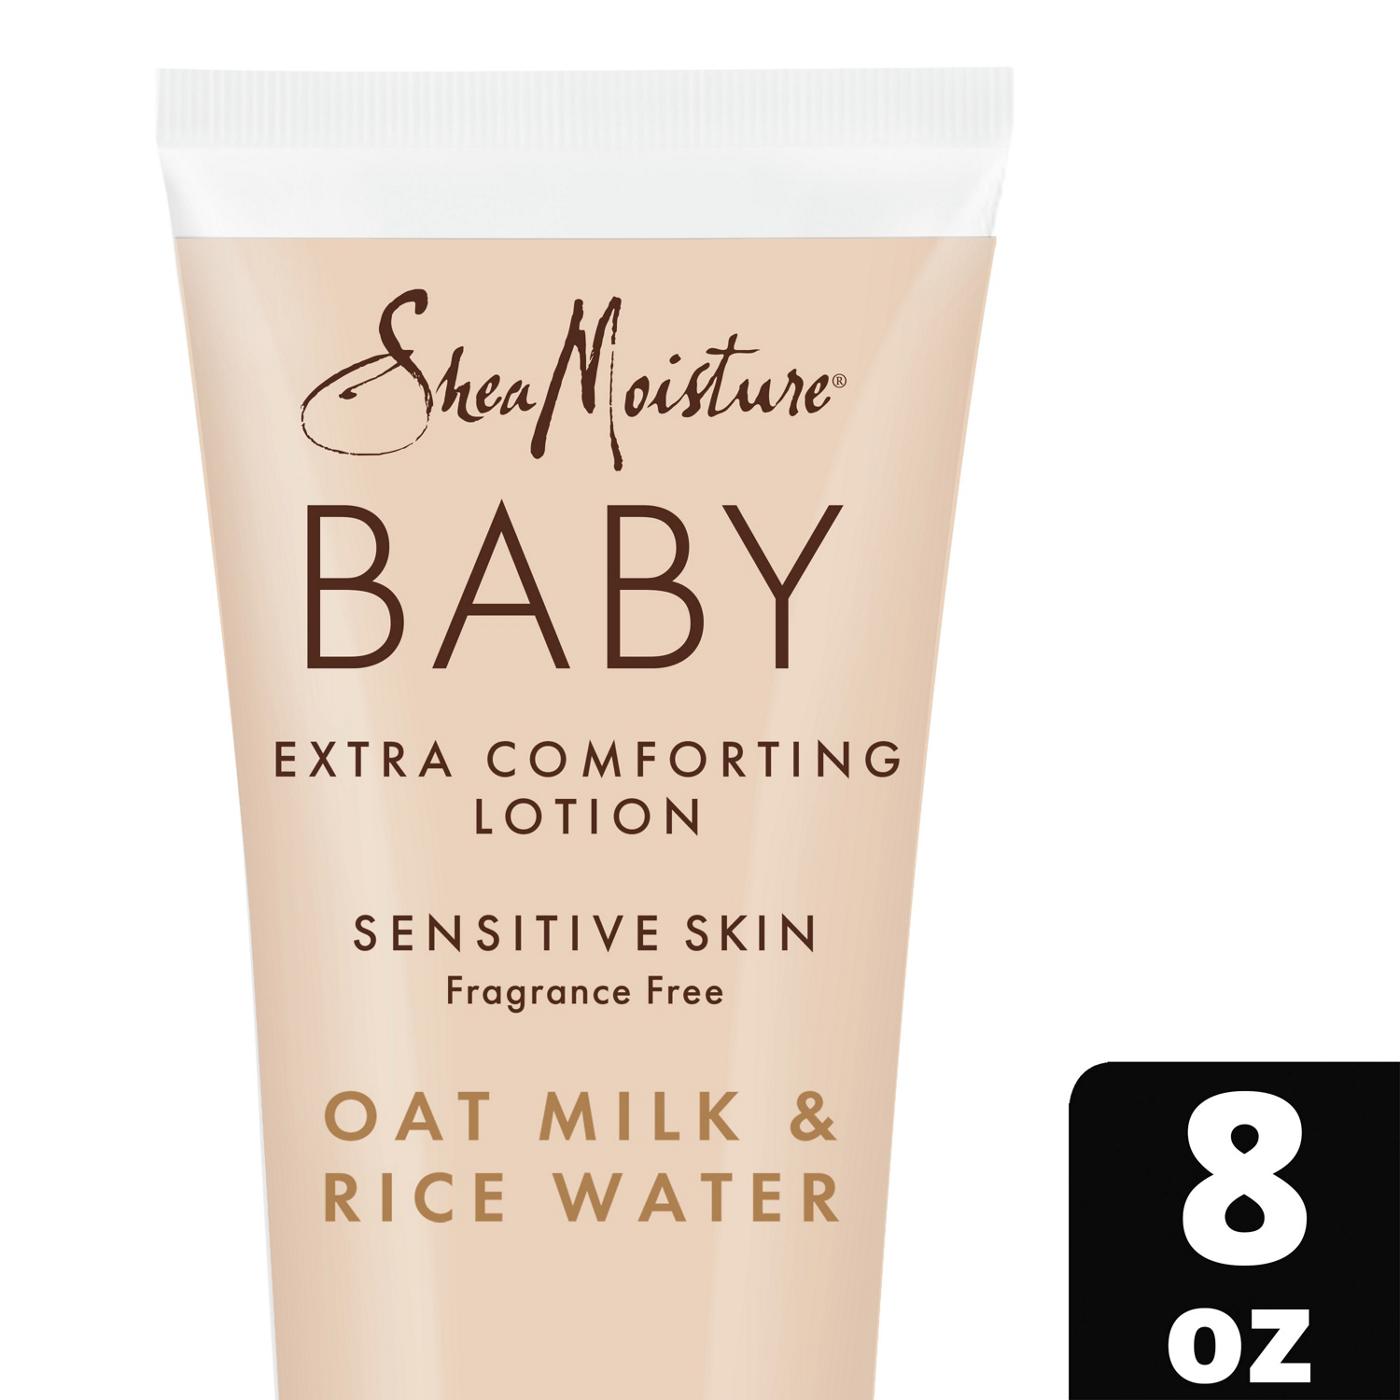 SheaMoisture Baby Lotion - Oat Milk & Rice Water; image 2 of 7